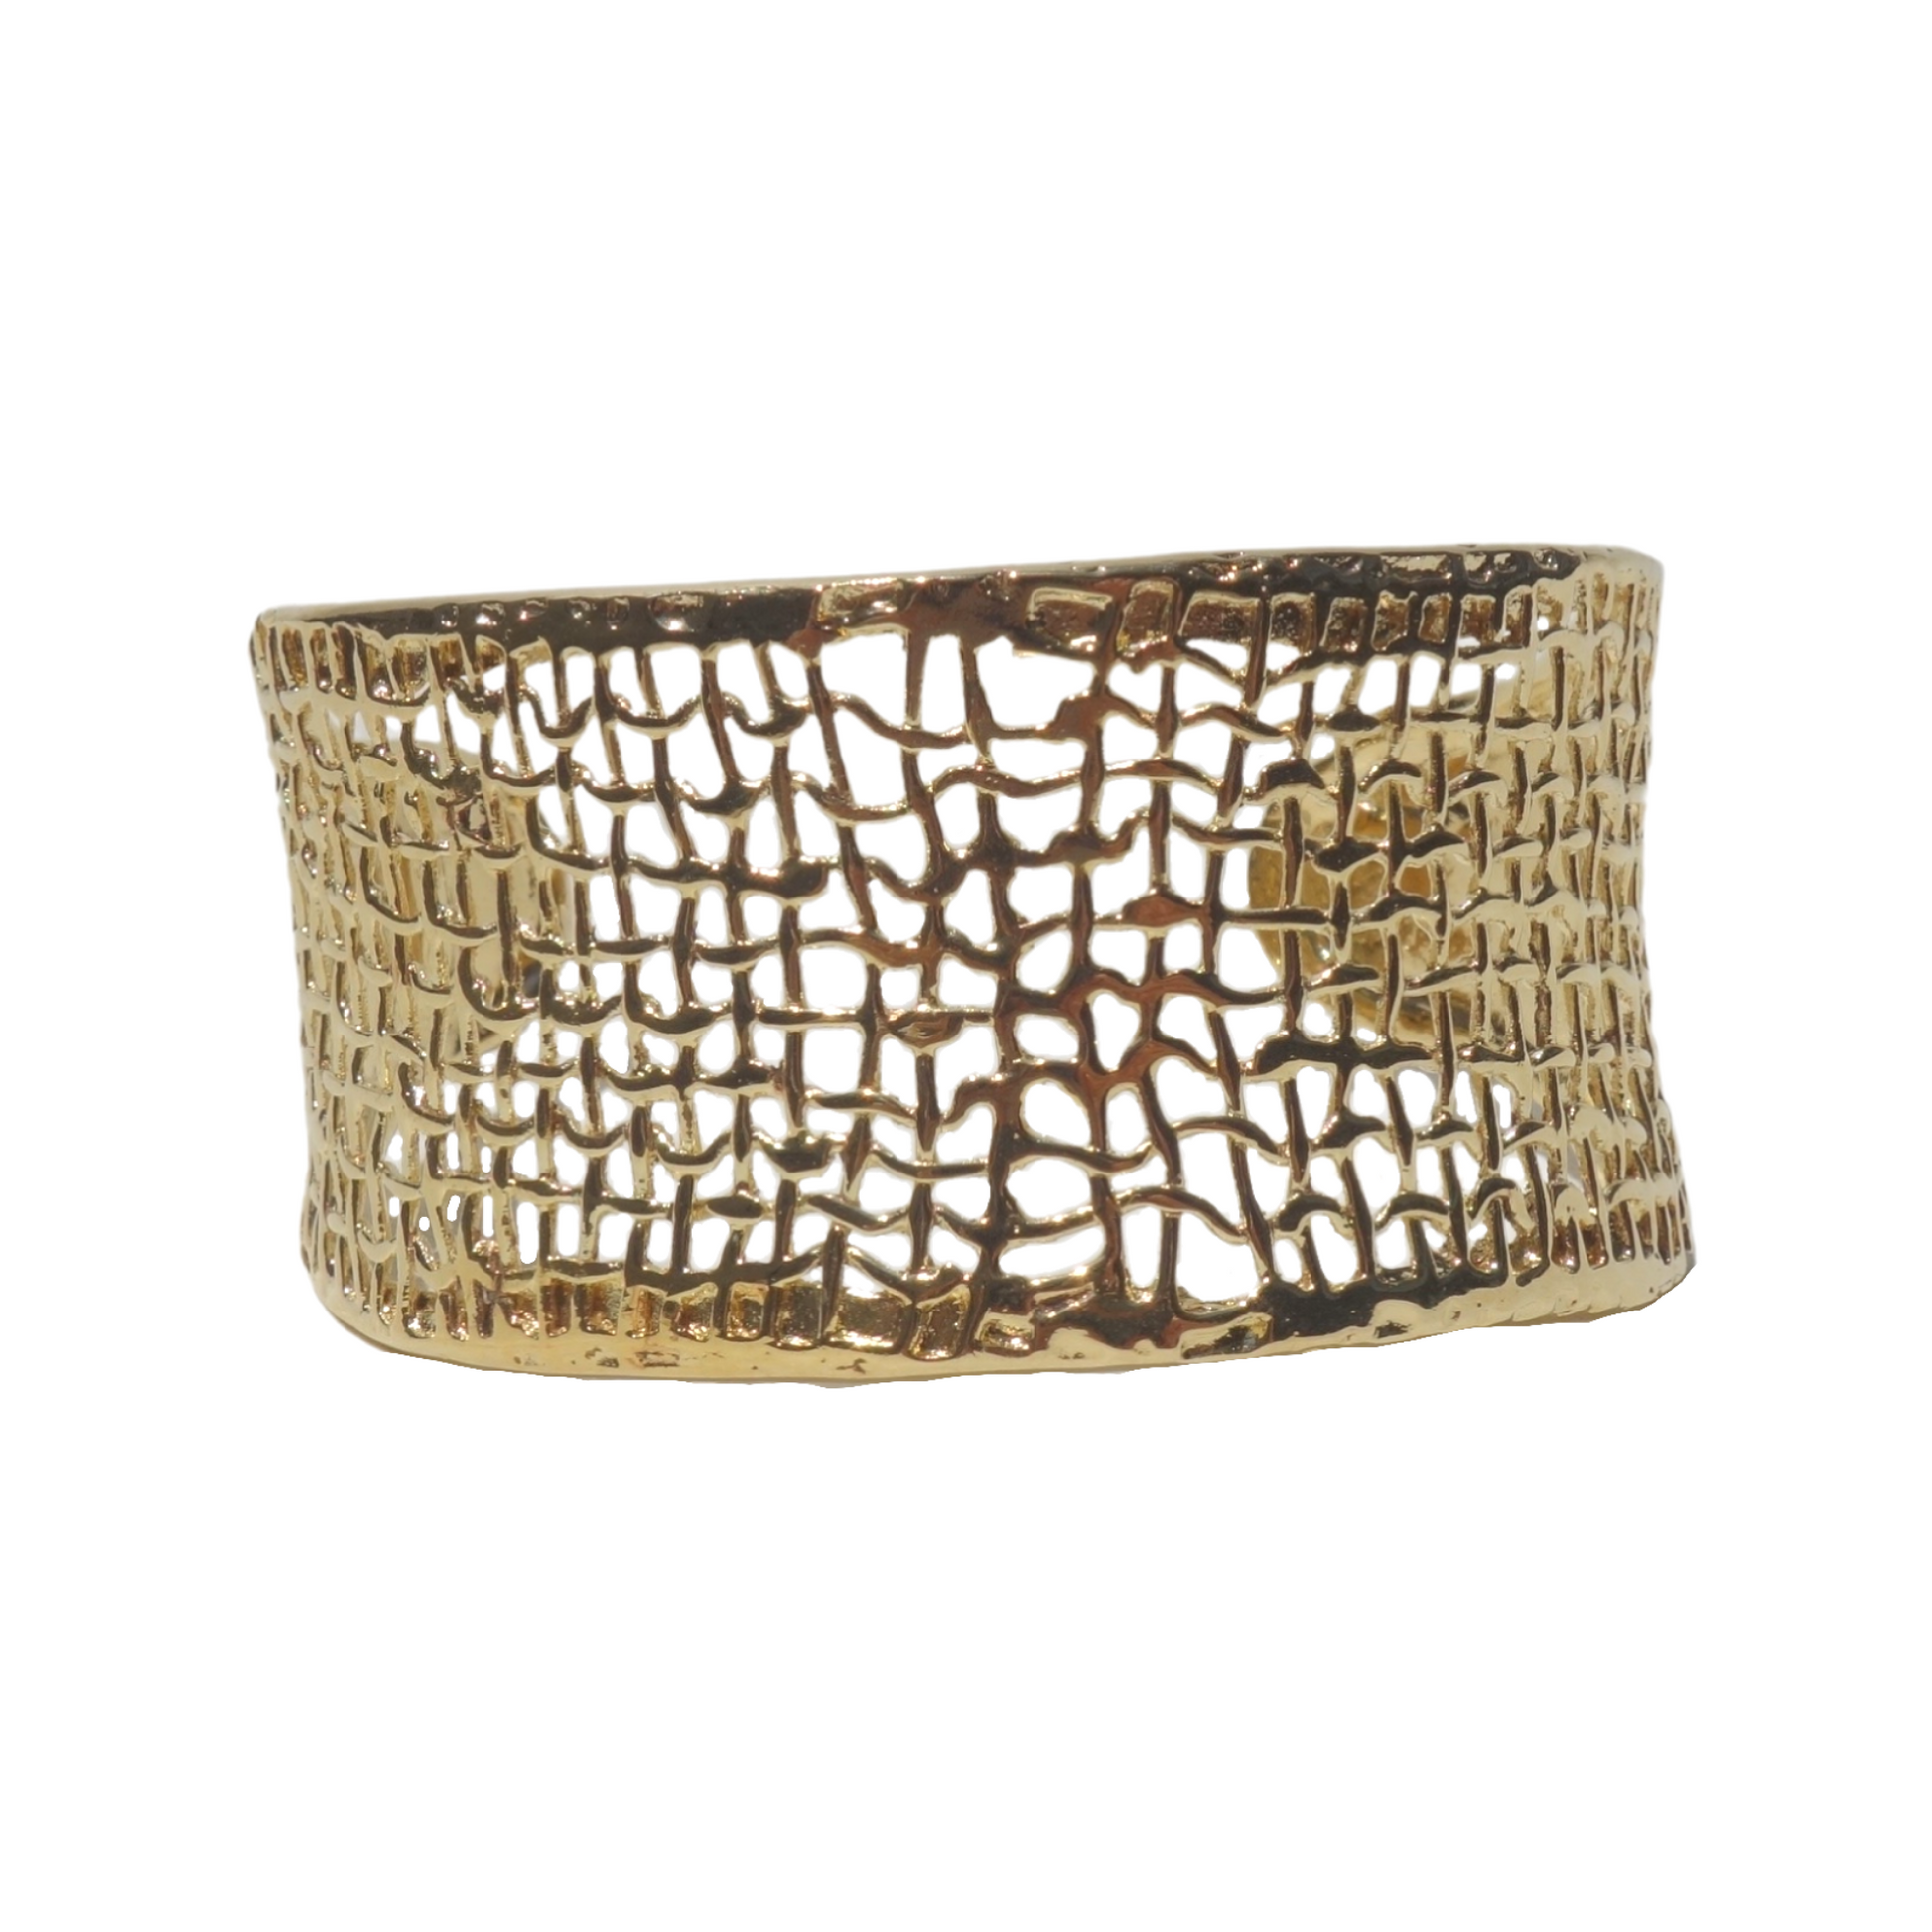 Elevate your jewelry collection with this stunning 14K solid yellow gold bracelet. The wide net textured design creates a unique and luxurious look. The bracelet measures 14cm in length and 30mm in width, making it a bold statement piece. Carefully labeled and stamped with 14K, this piece comes in a gift box for added elegance. Enjoy free shipping and trust us for registered and insured delivery. Order now and add this gorgeous piece to your collection.